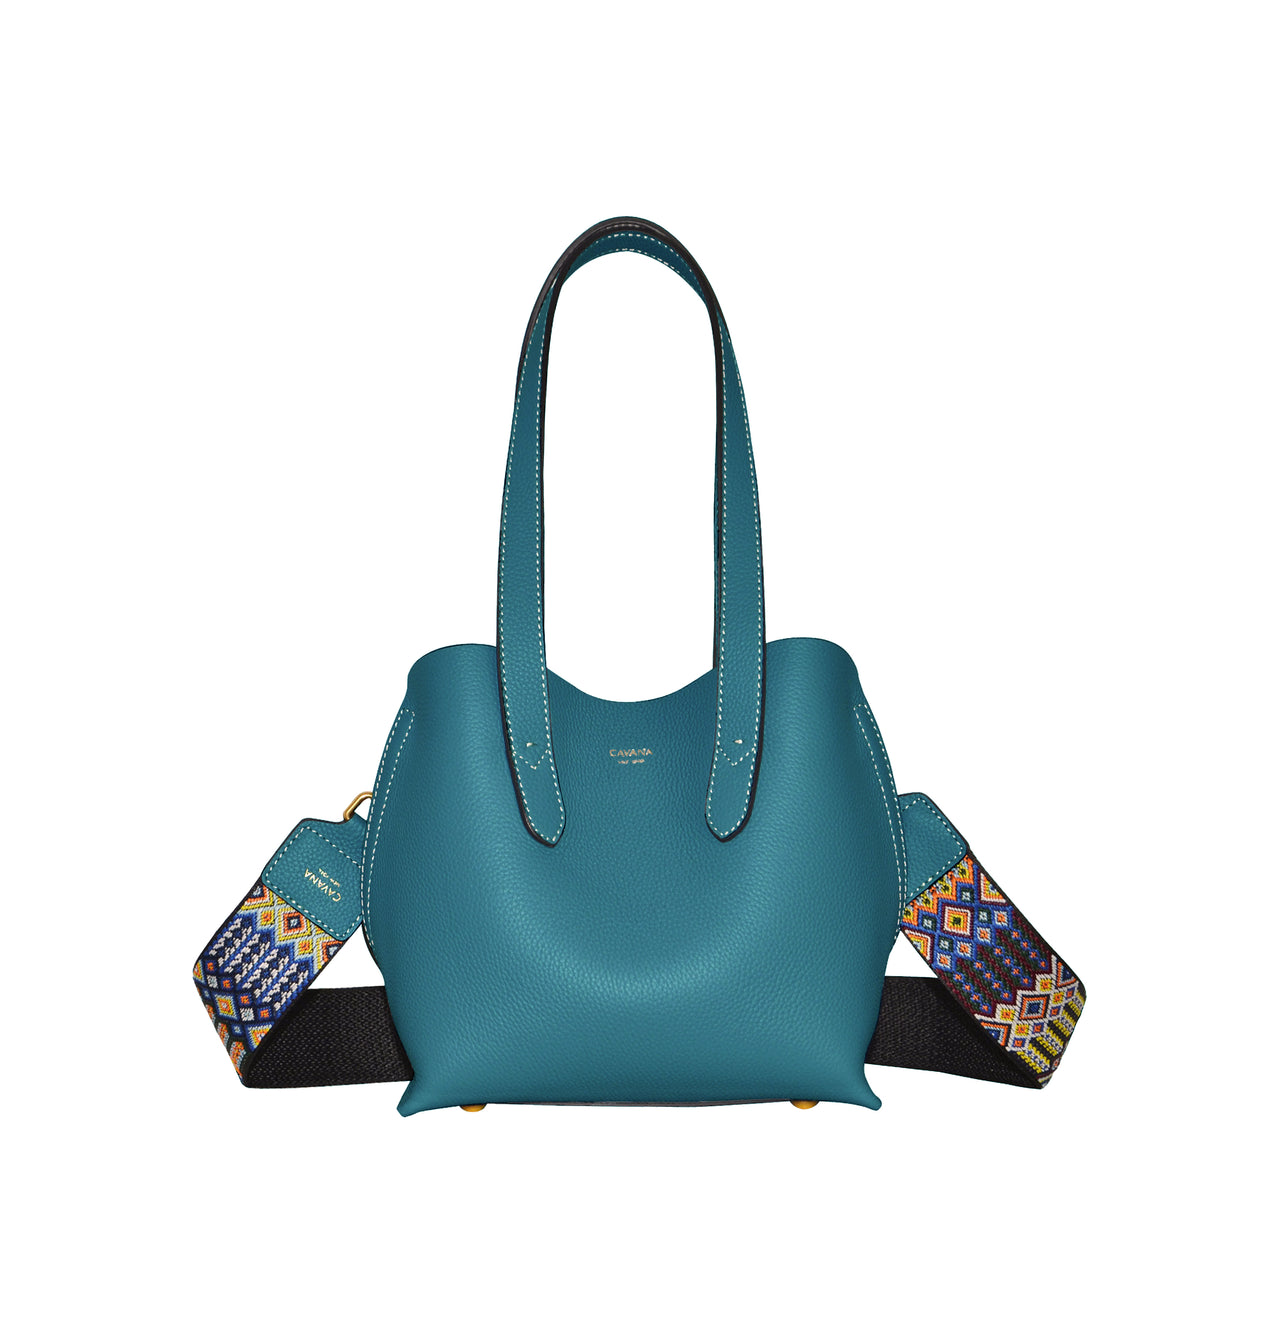 ARCO BAG IN PEACOCK-BLUE